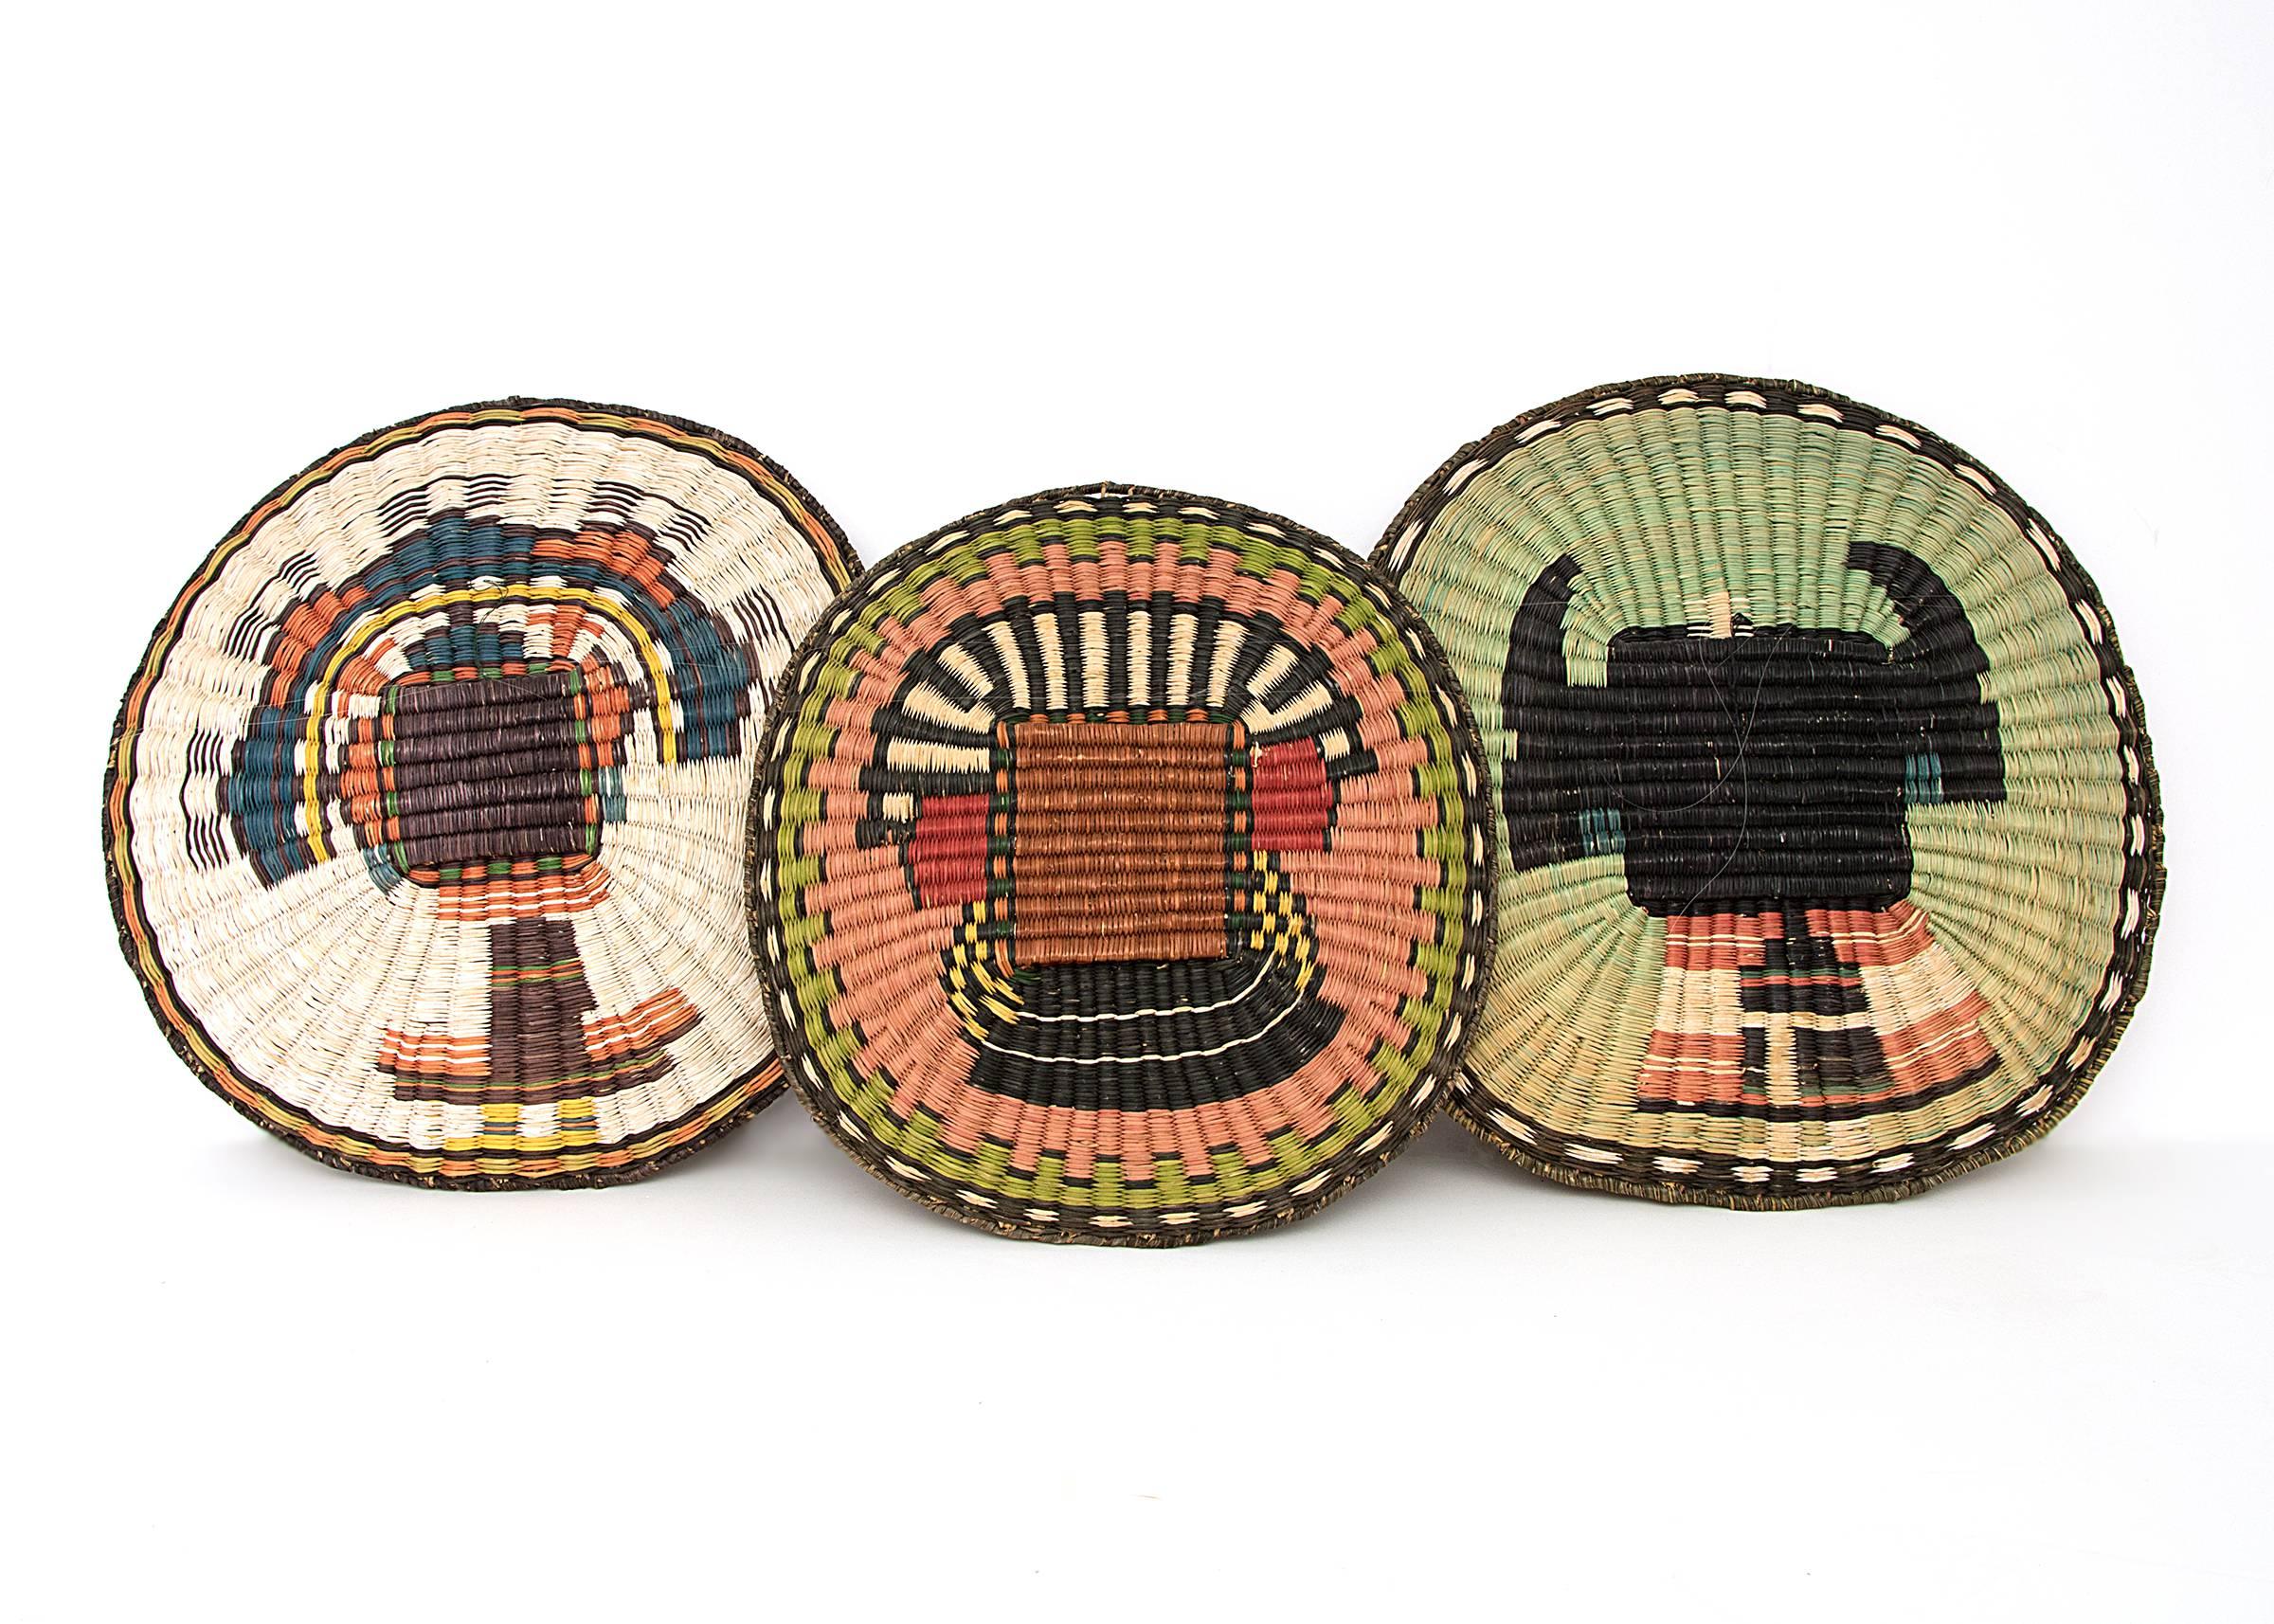 Originating at the Hopi Third Mesa, these trays are woven of sumac with images of Kachinas. Plaques such as these play an integral role in Hopi wedding ceremonies and various life cycle events and are often woven as gifts. 

Individual